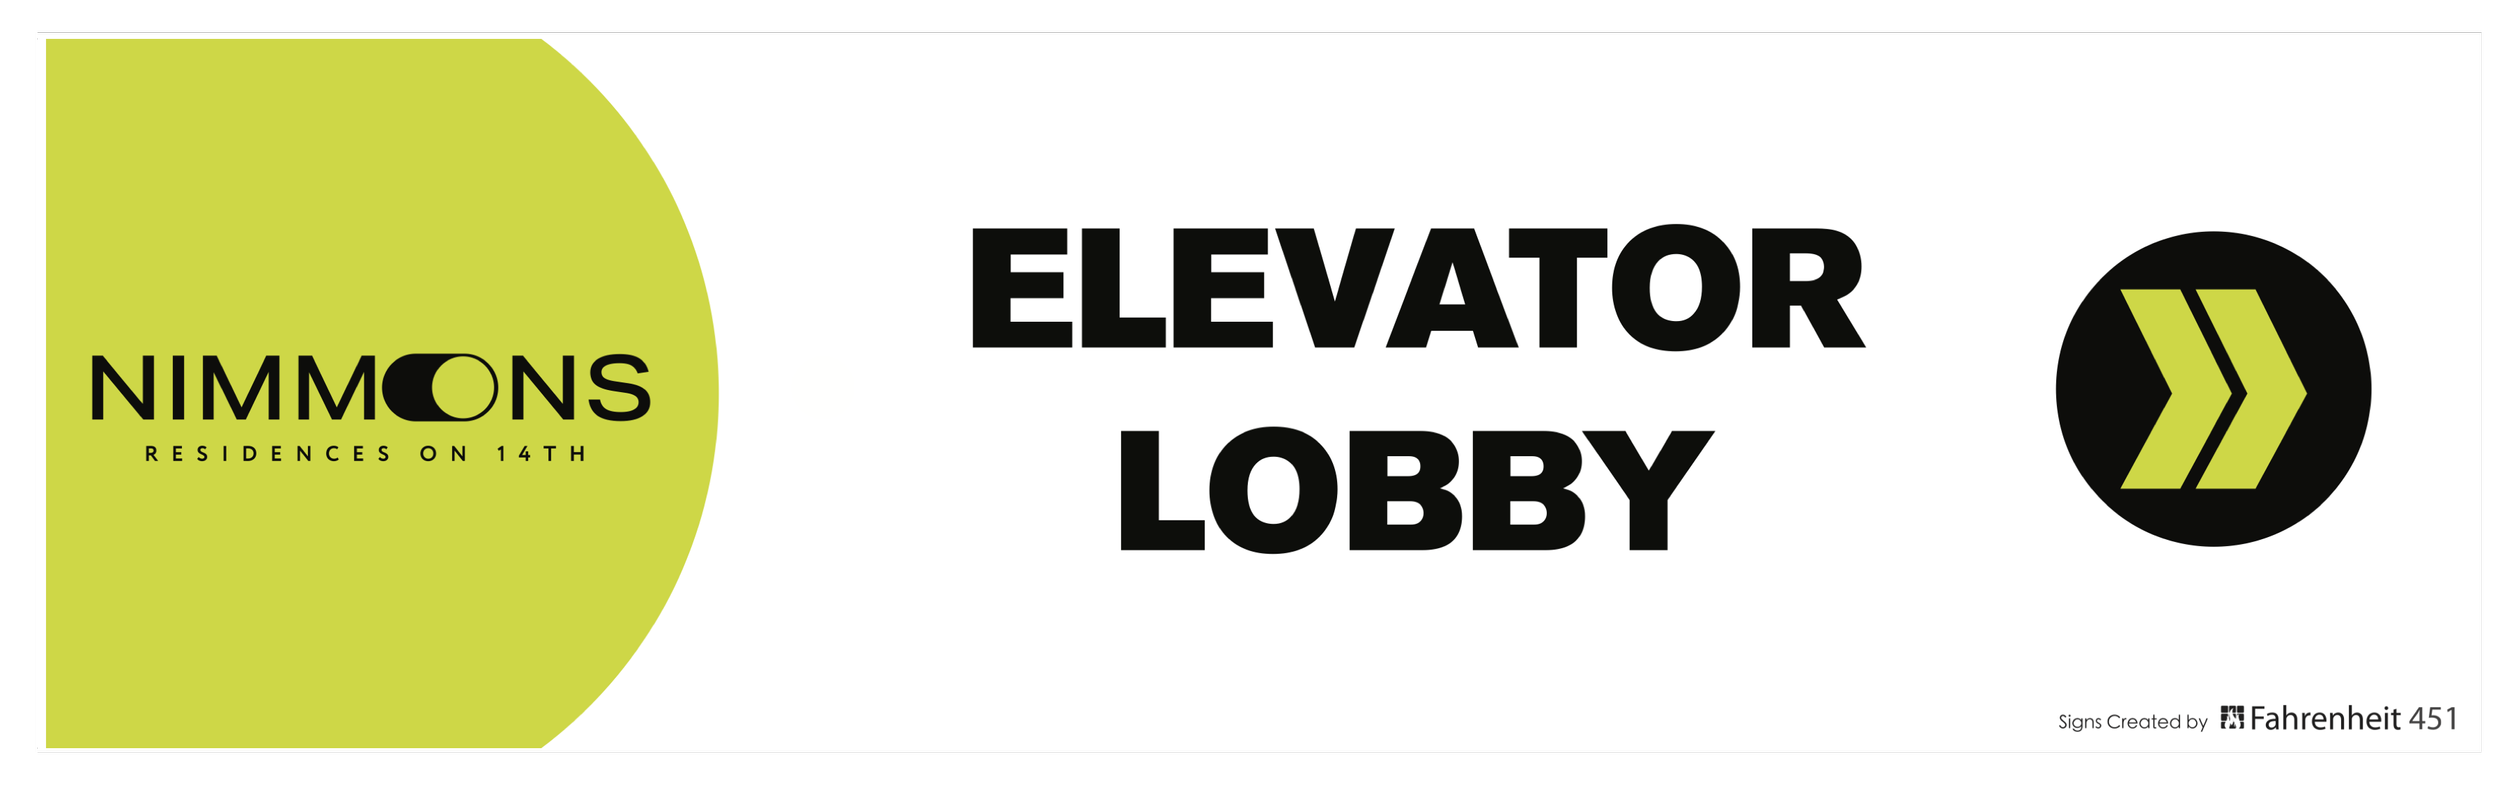 Nimmons Directional Signage Elevator Lobby Right.png